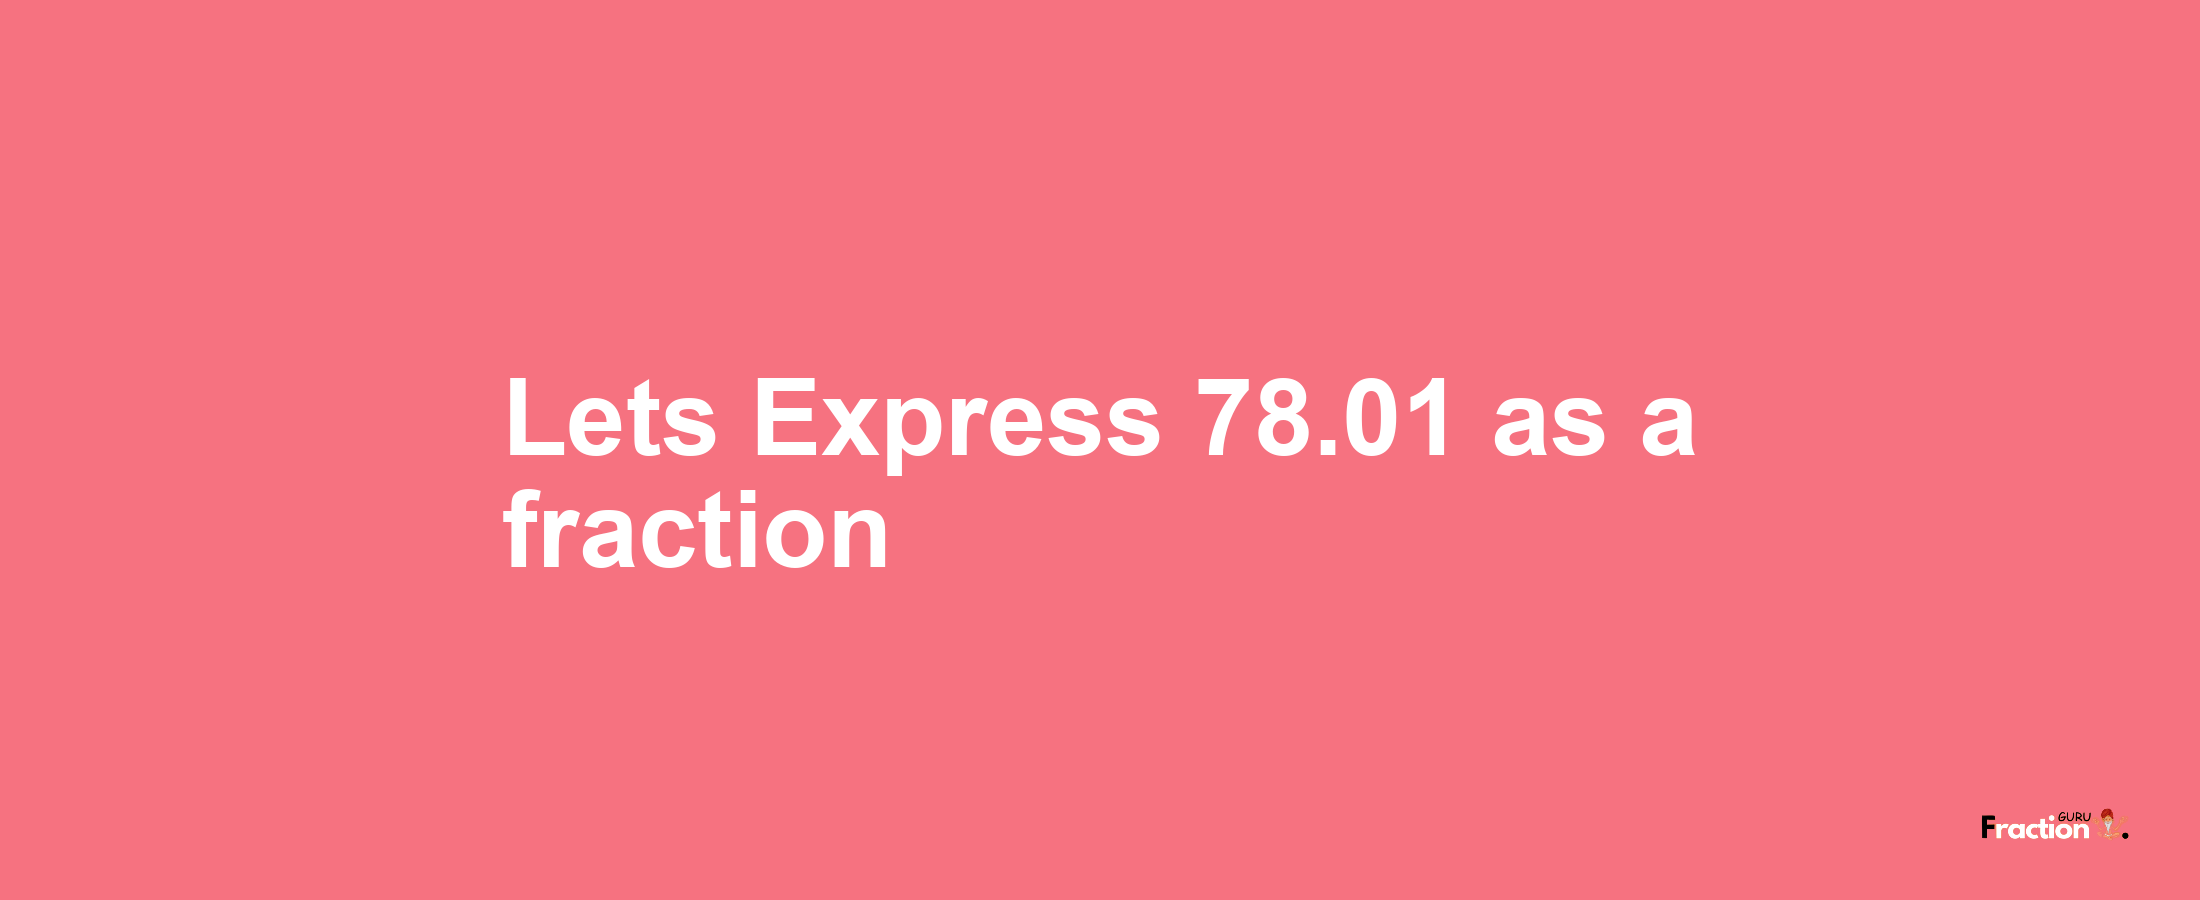 Lets Express 78.01 as afraction